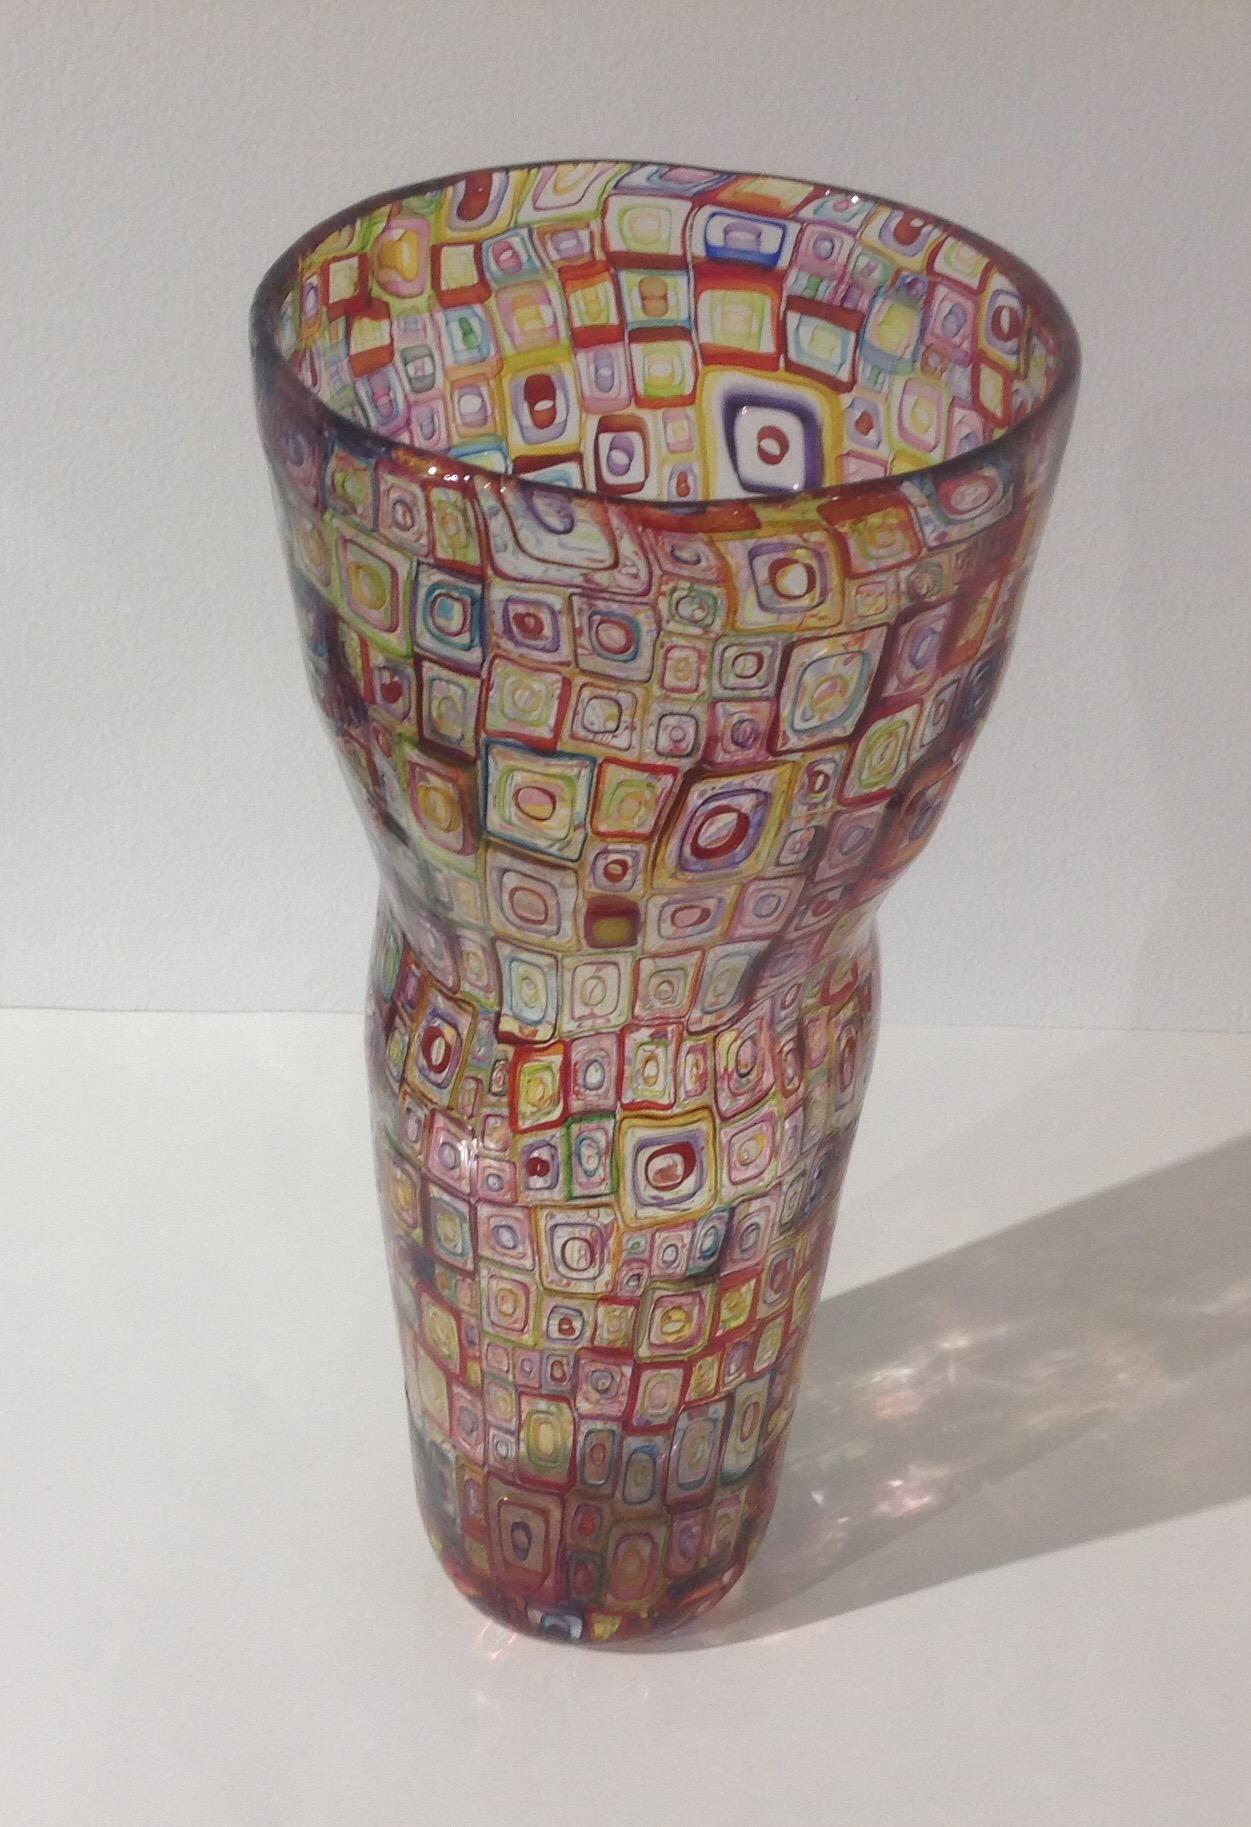 Monumental Mosaic glass vase by American Studio glass artist Robin Mix. signed and dated from 2003.